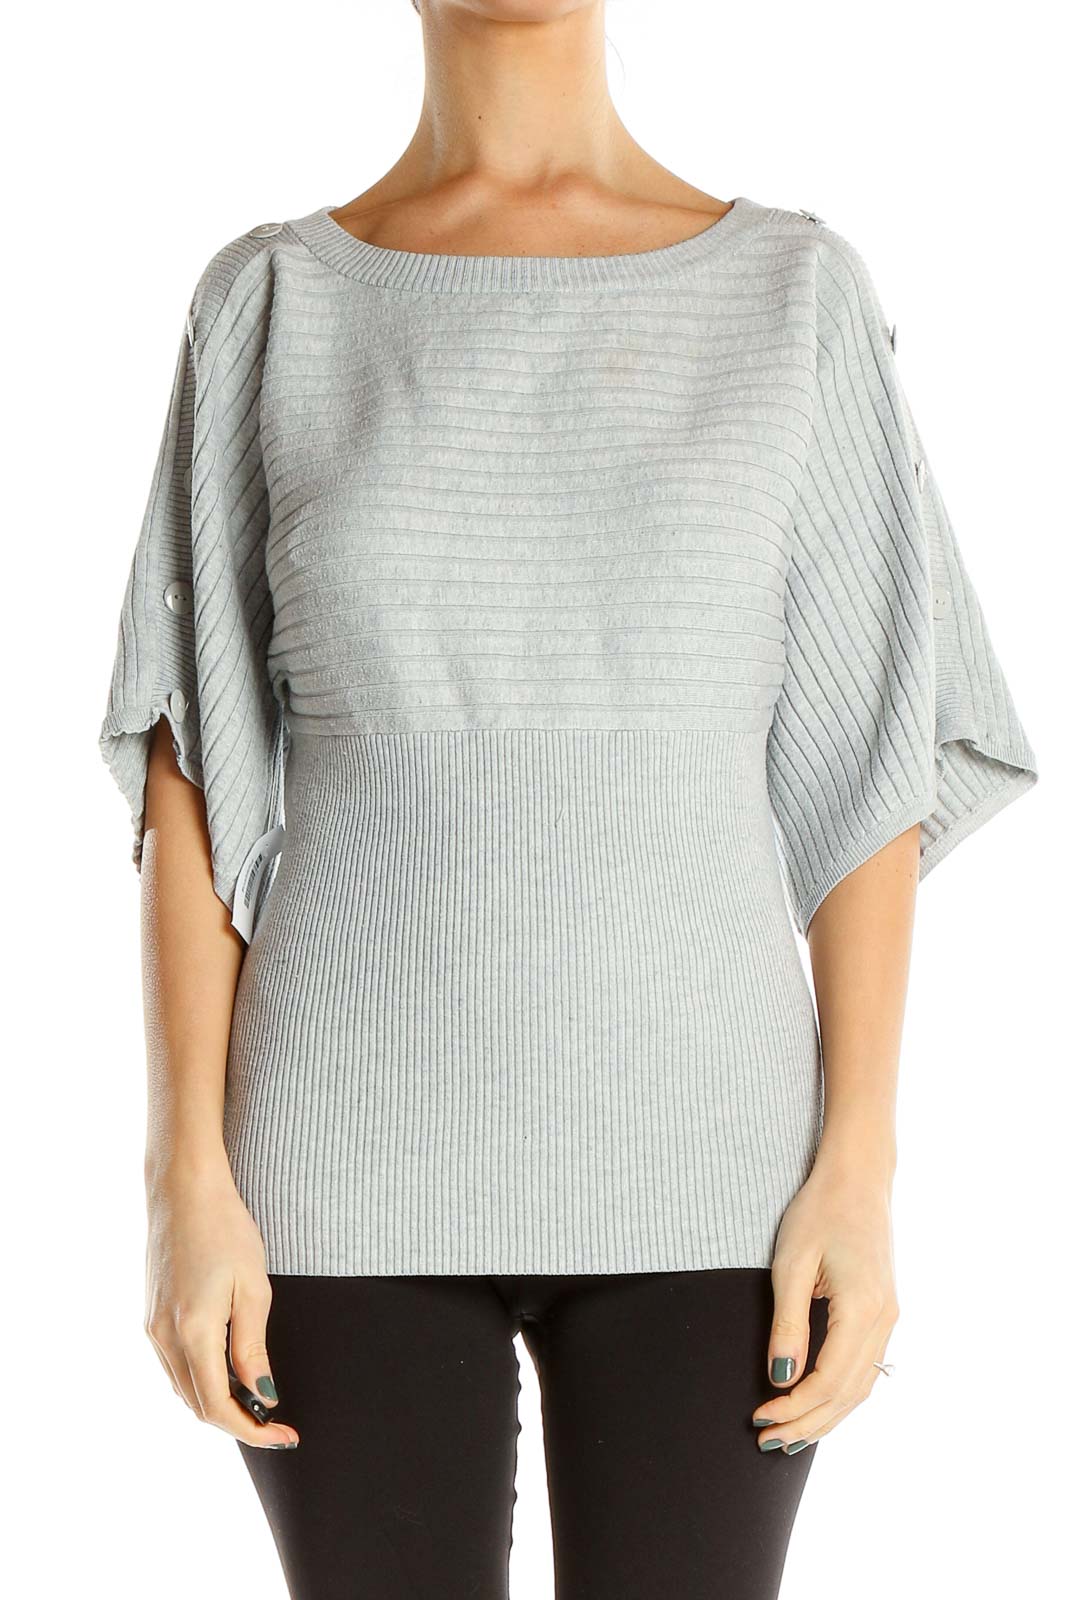 Gray Textured All Day Wear Top Front